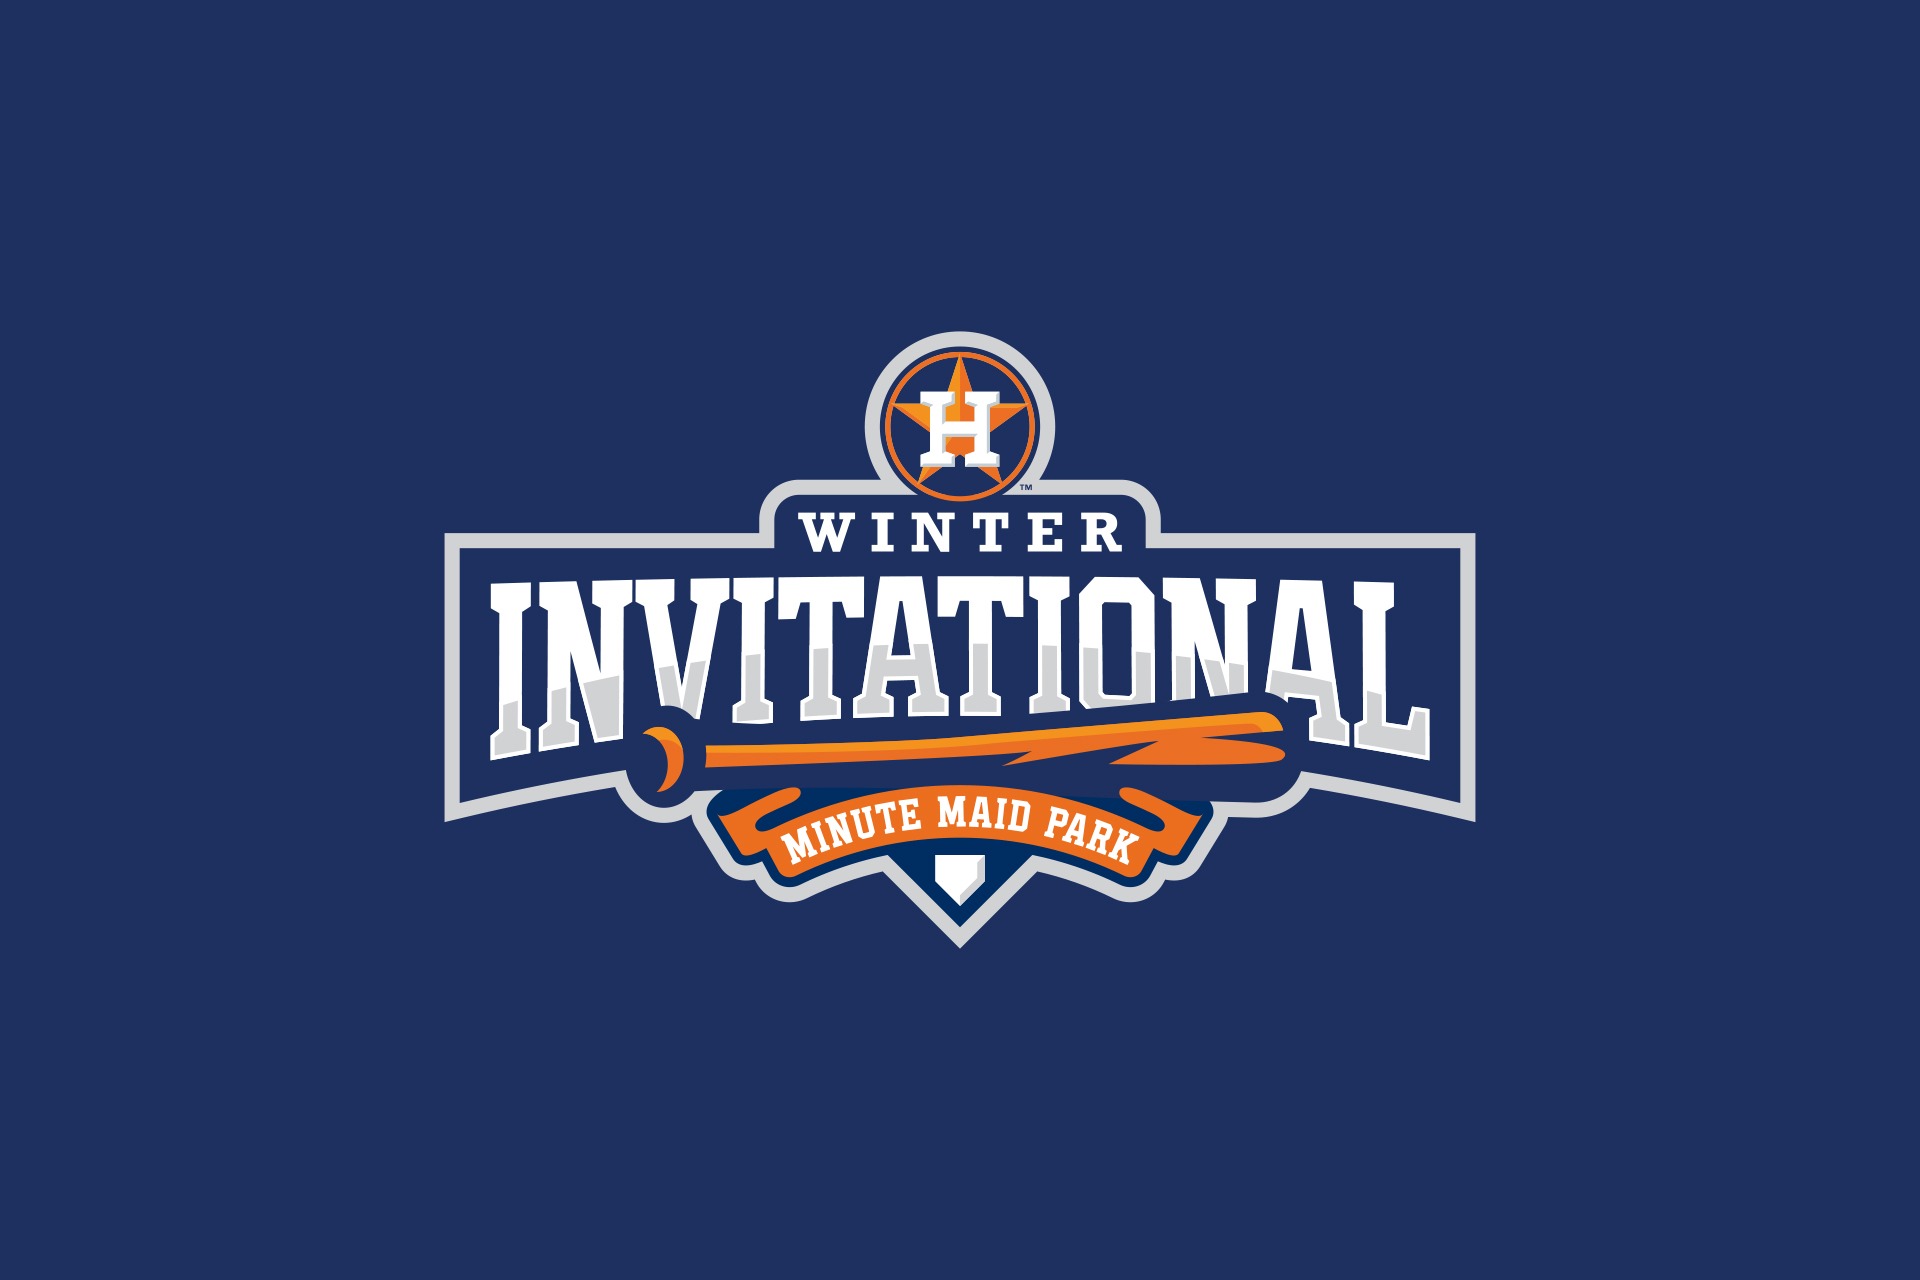 Houston Winter Invitational - All Event Pass at Minute Maid Park